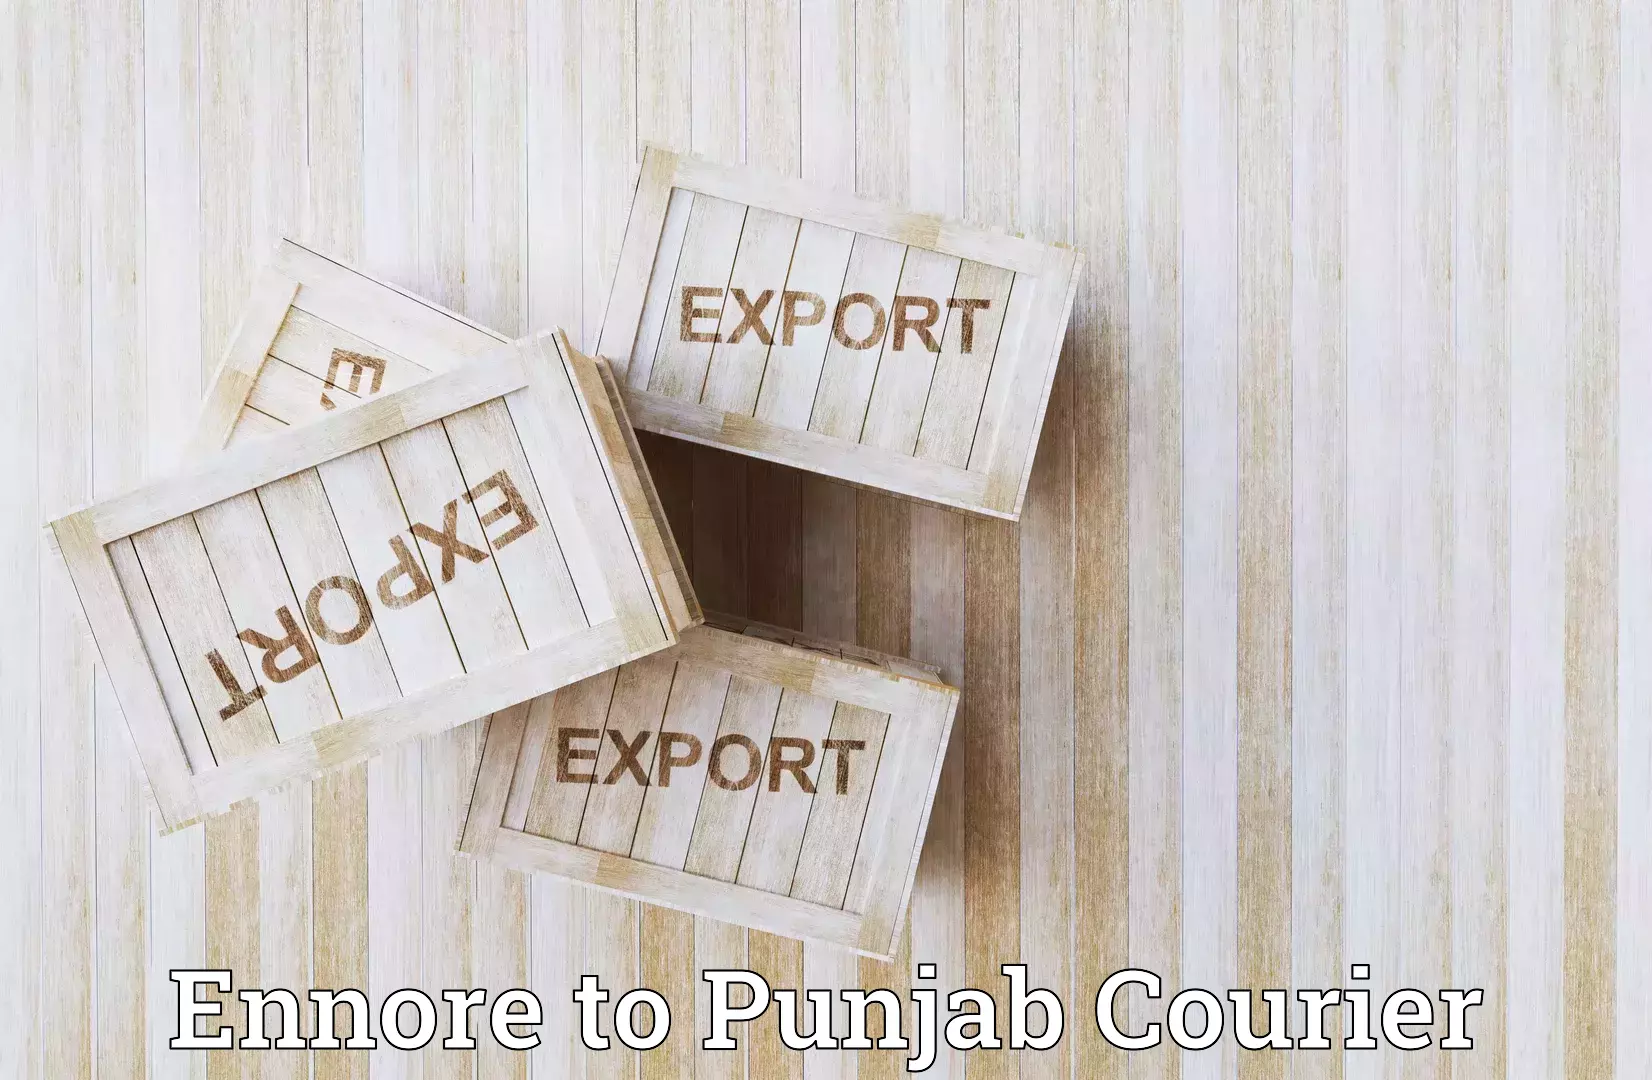 Seamless shipping experience Ennore to Anandpur Sahib